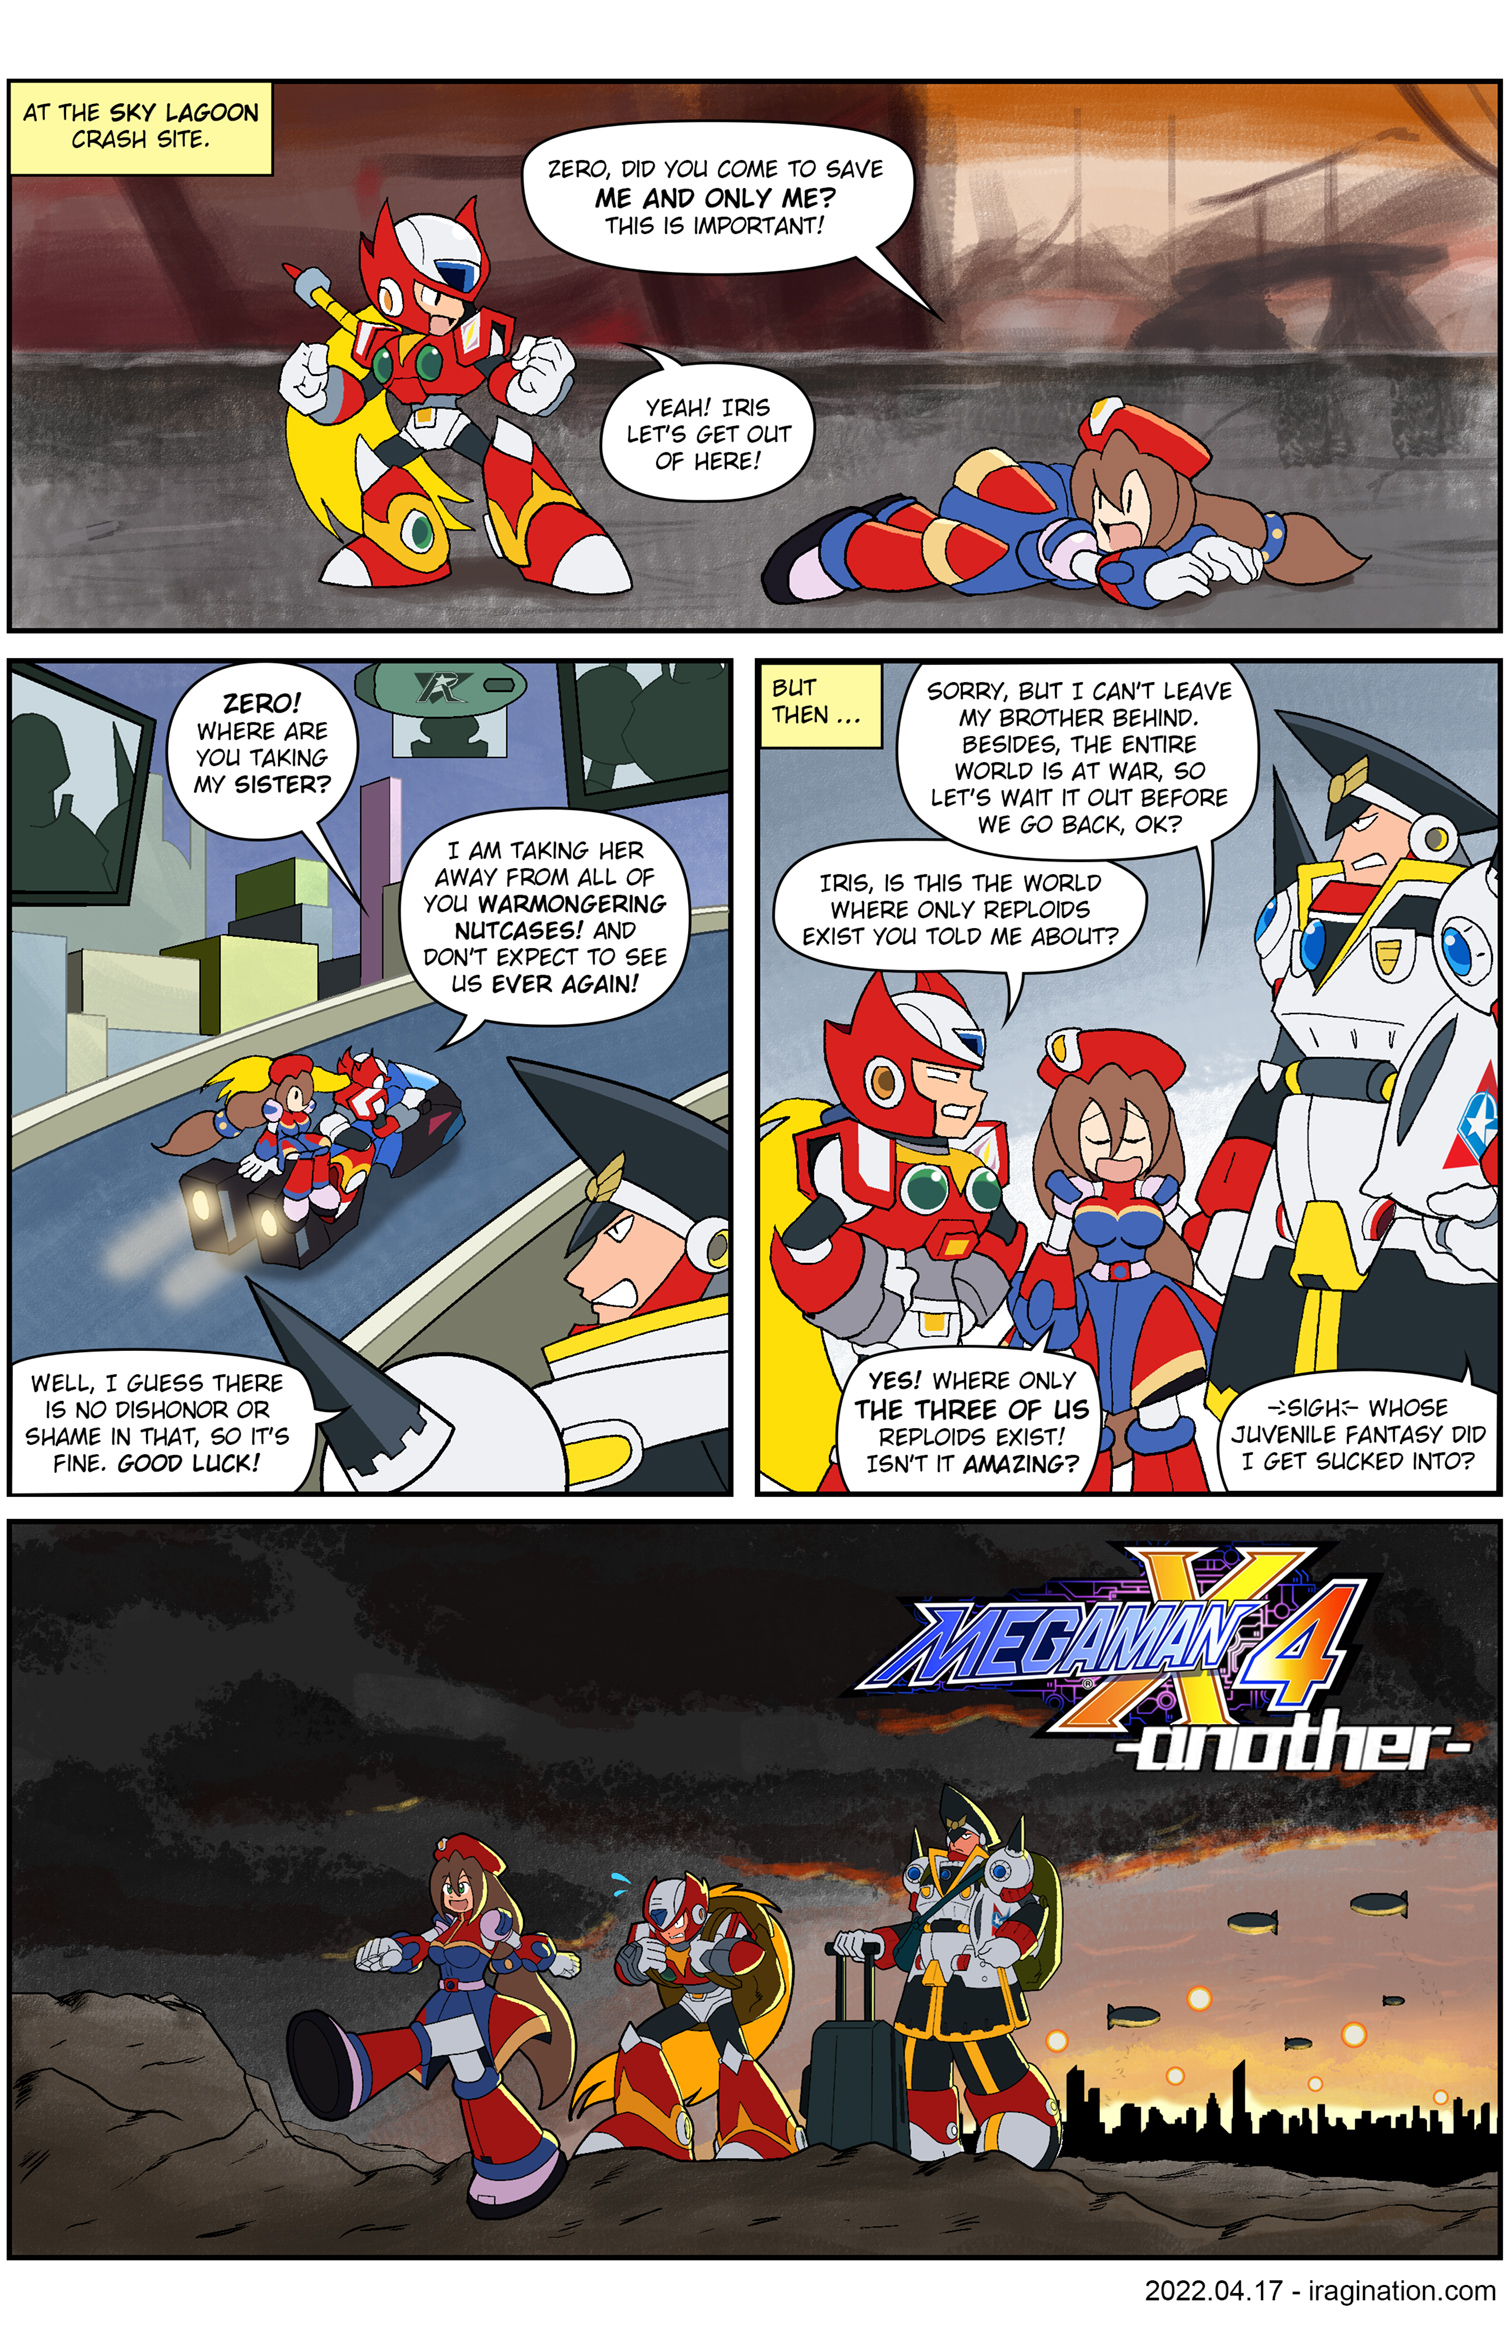 Mega Man X4 -another-
It’s been almost a year since Rockman X DiVE introduced [url=https://youtu.be/mFQxdeS2QKY]Iris -another-[/url], and while this comic does not include her, I used the [i]-another-[/i] qualifier to describe this little story. Thus, it is a setting that can only exist in extraordinary circumstances. 

Whether this is some character’s desperate dream or the manifestation of another Deep Log error, I will let you decide.

[b]Resources[/b]
[url=https://megaman.fandom.com/wiki/Mega_Man_X4/Gallery#Logos]Mega Man X4 logo[/url]

[url=https://openclipart.org/detail/263163/city-skyline-silhouette]City Skyline[/url]

Mega Man X (C) CAPCOM.

Keywords: iris zero colonel general